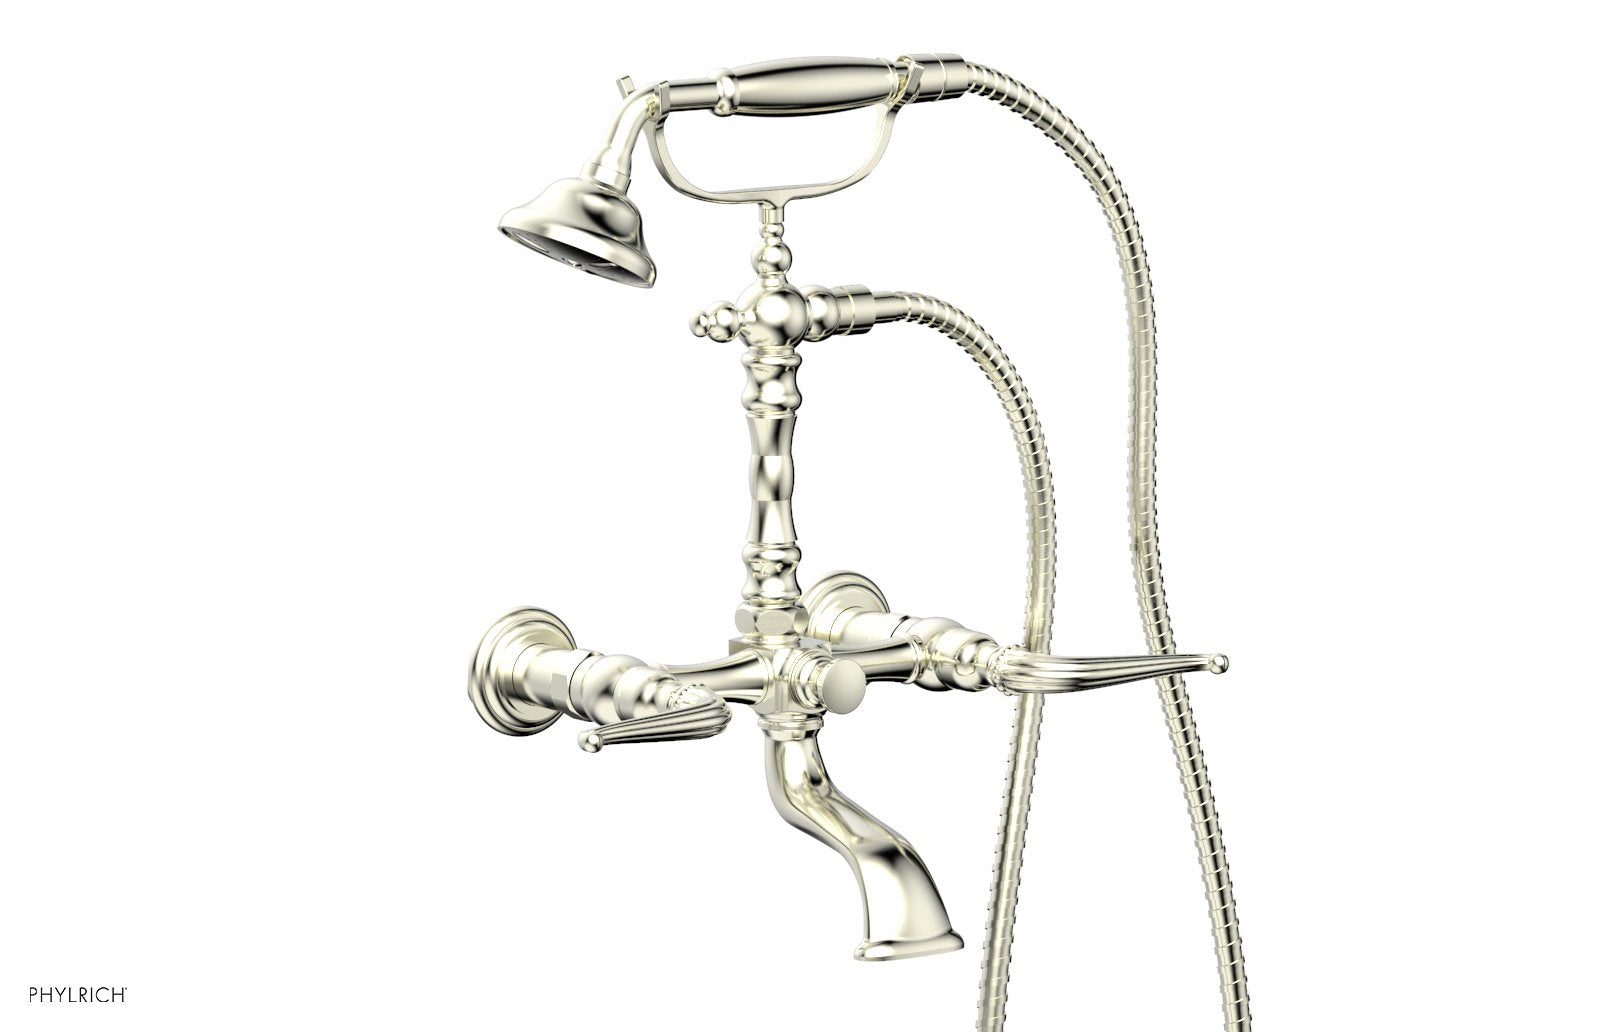 Phylrich GEORGIAN & BARCELONA Exposed Tub & Hand Shower - Lever Handle